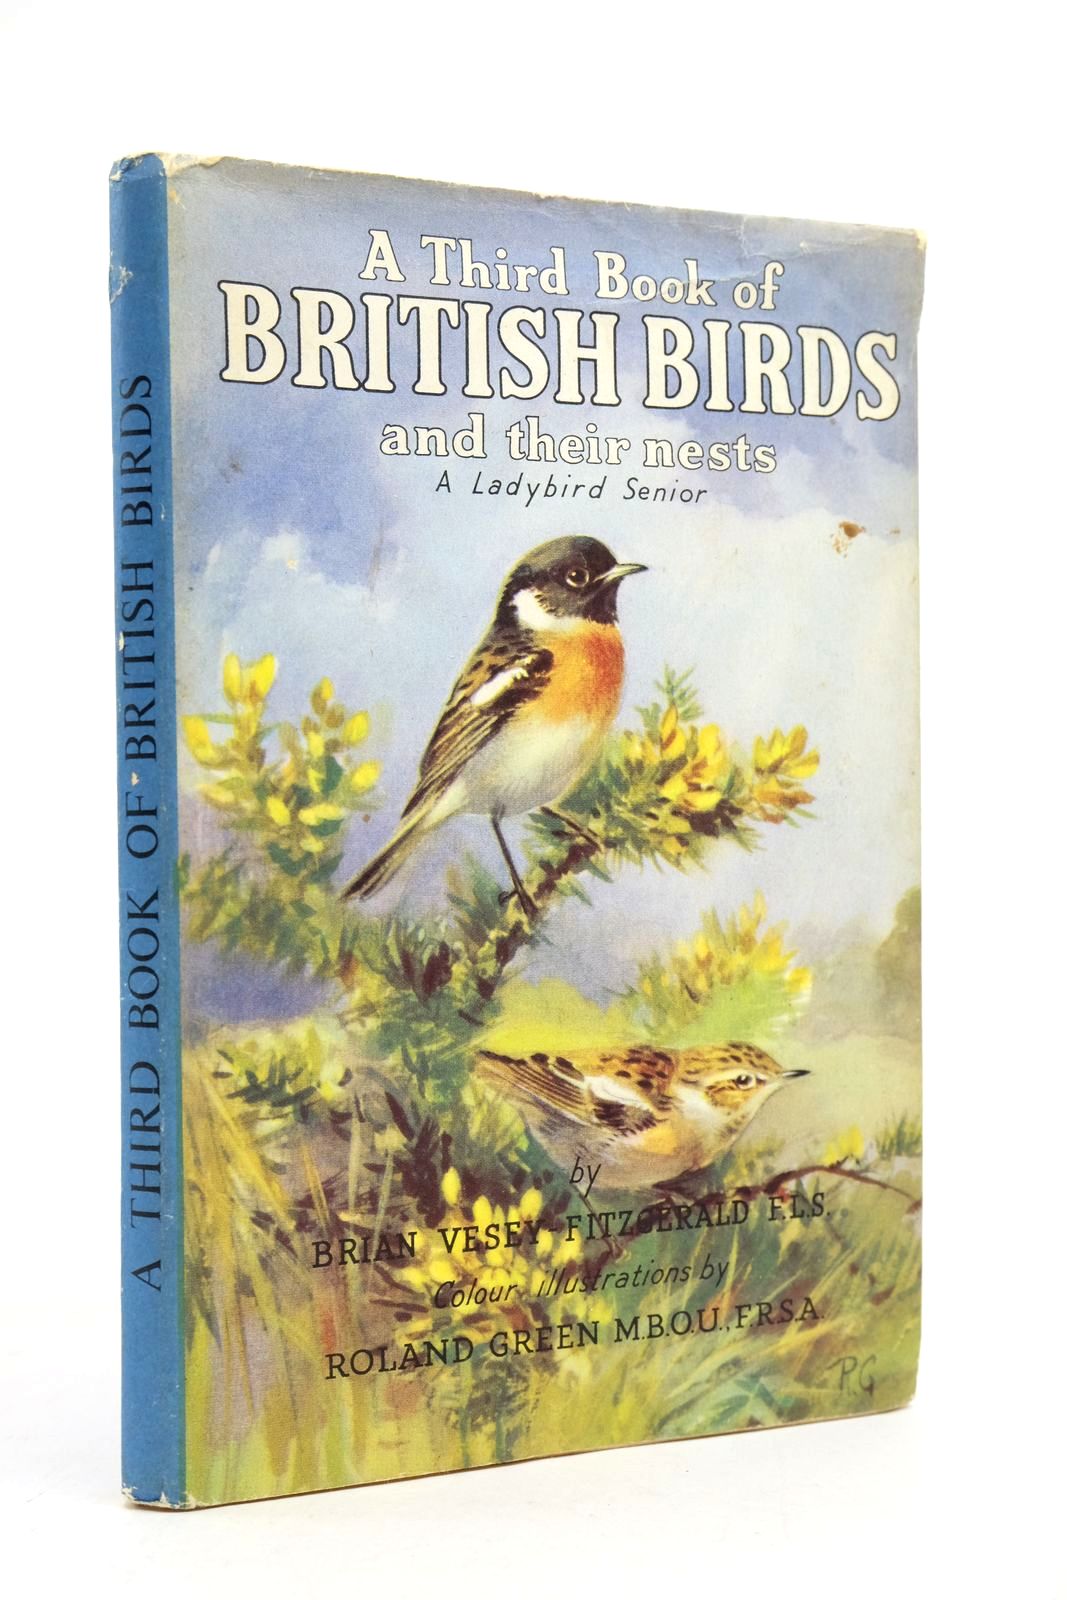 Photo of A THIRD BOOK OF BRITISH BIRDS AND THEIR NESTS written by Vesey-Fitzgerald, Brian illustrated by Green, Roland published by Wills & Hepworth Ltd. (STOCK CODE: 2139705)  for sale by Stella & Rose's Books